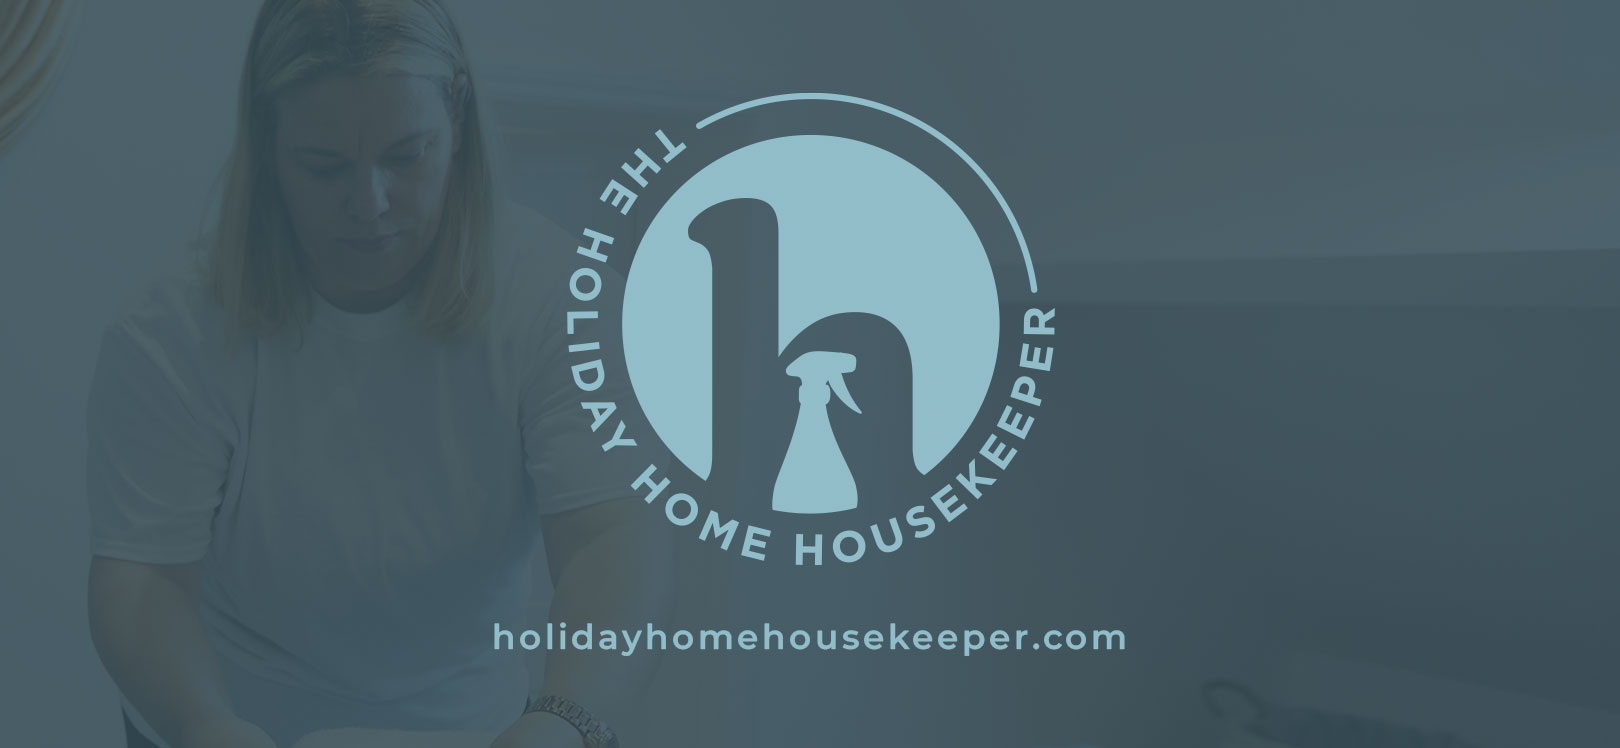 The Holiday Home Housekeeper